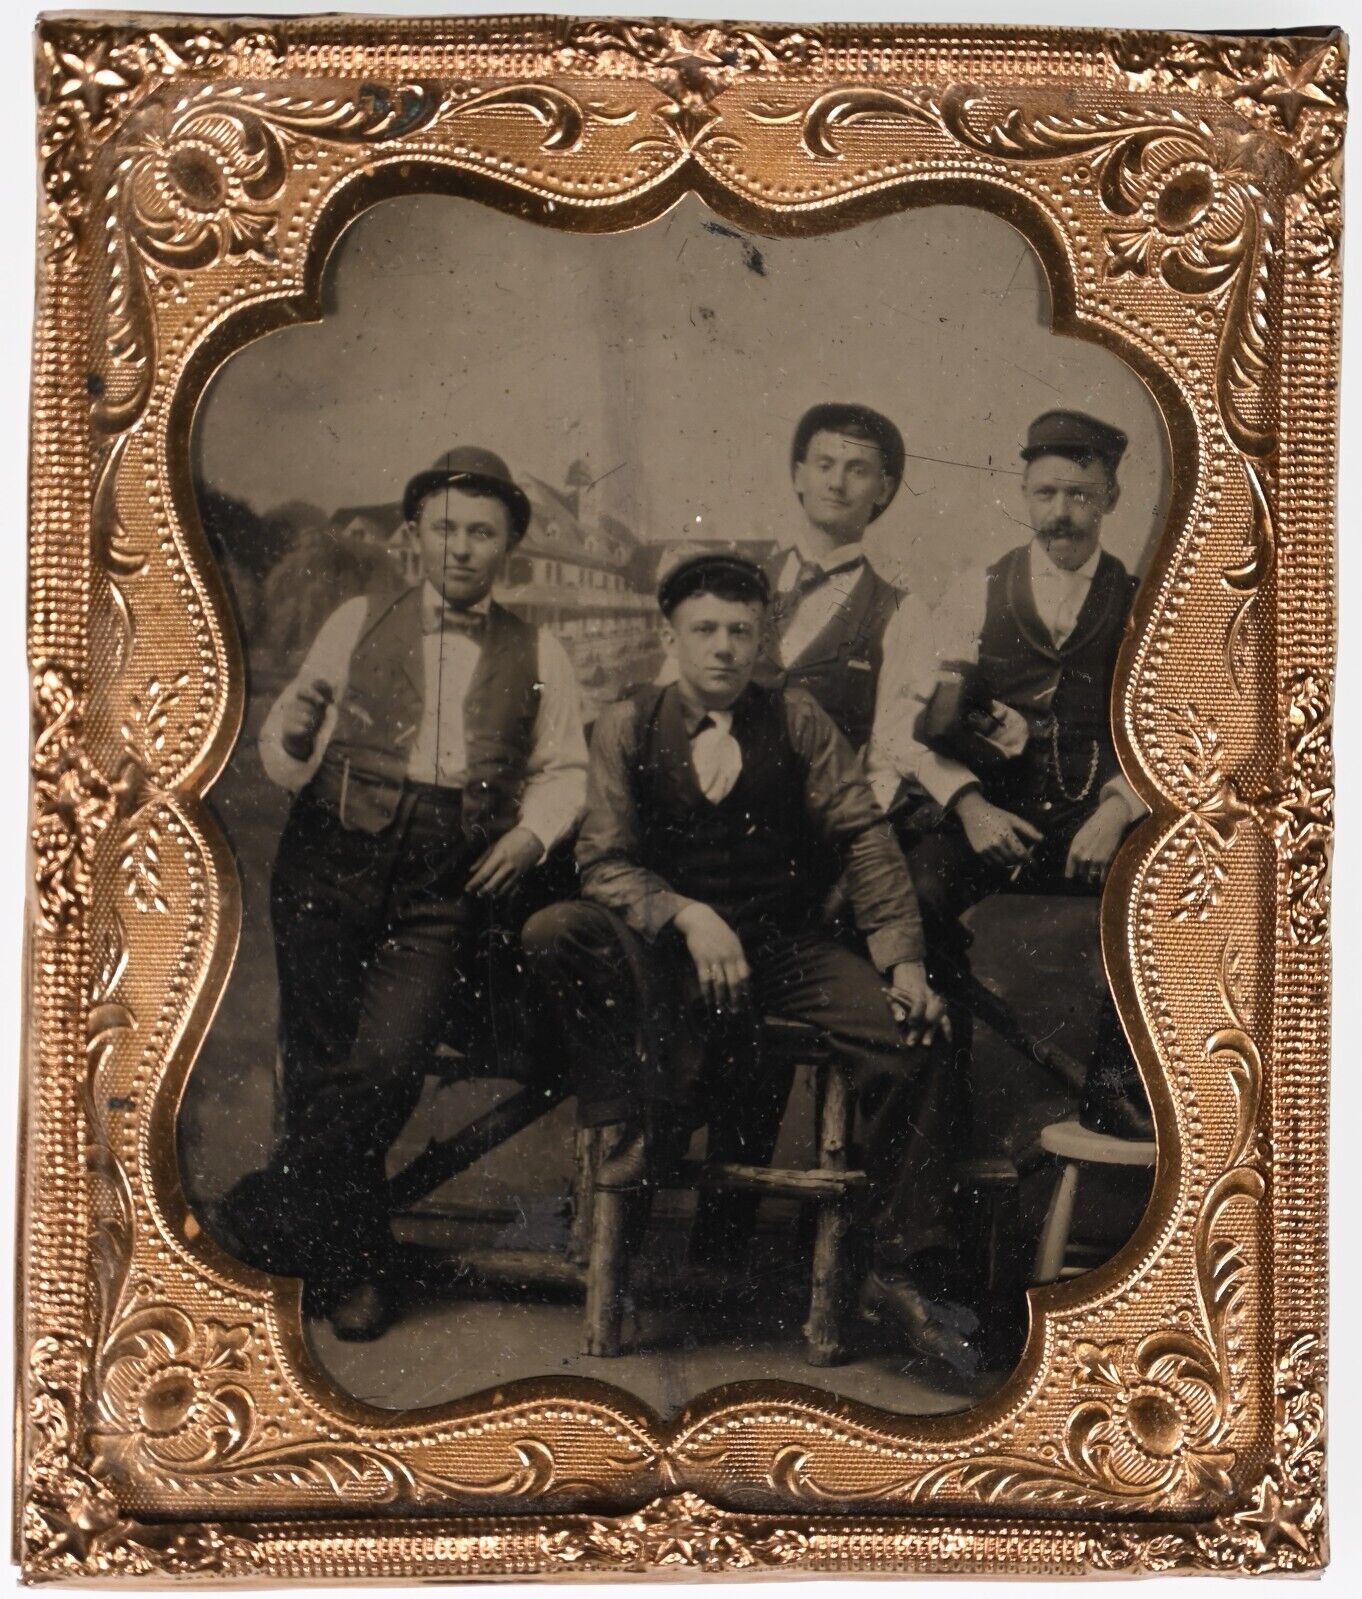 CIRCA 1870s 1/4TH PLATE CASED TINTYPE FOUR HANDSOME YOUNG MEN SMOKING TOBACCO